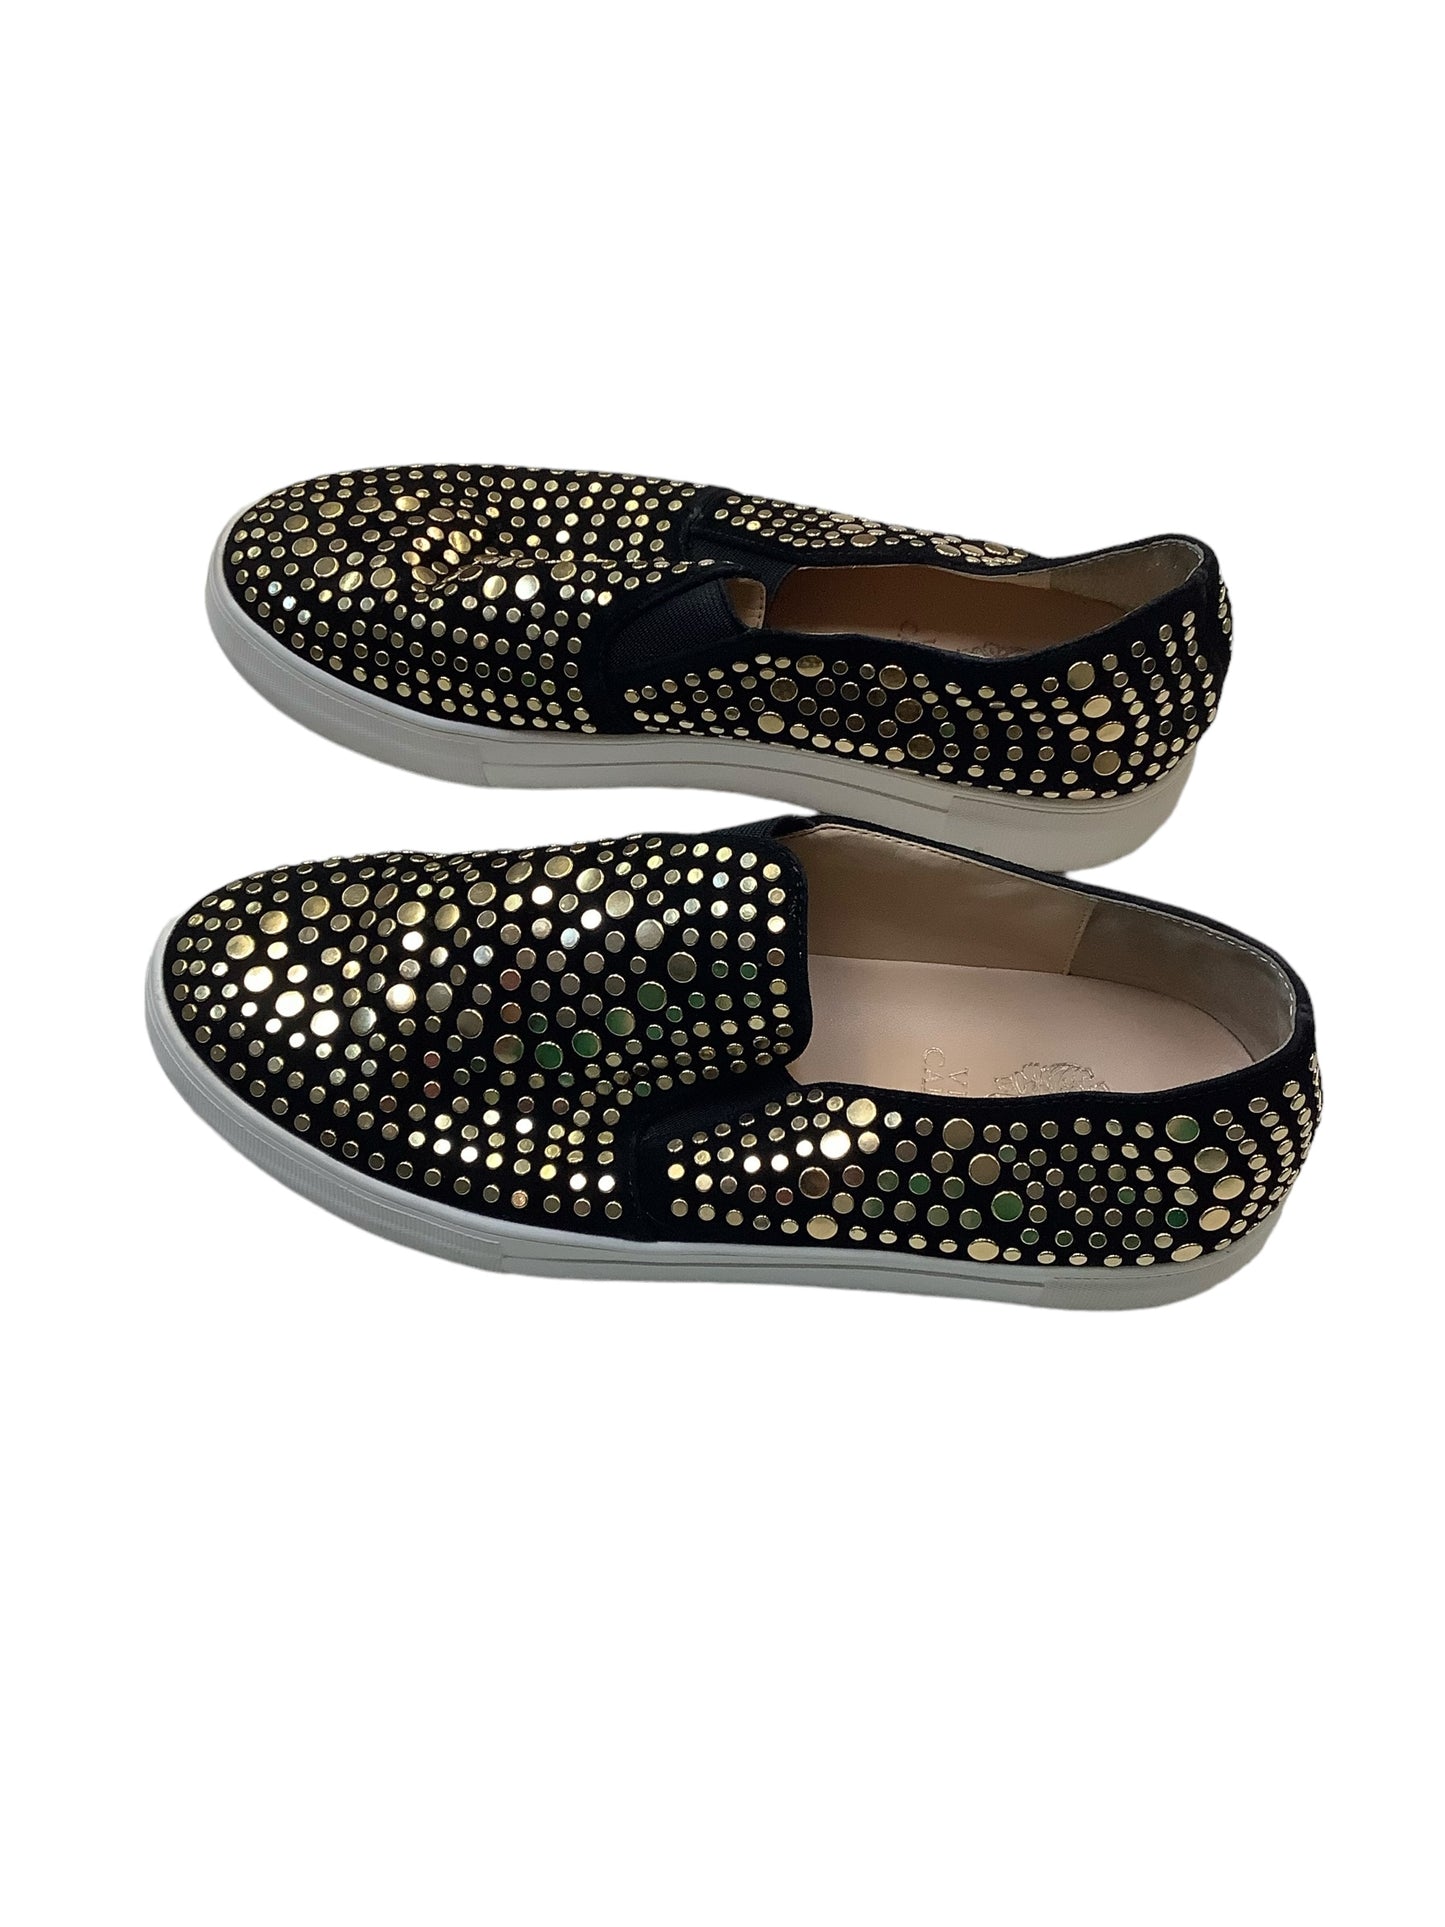 Shoes Flats Boat By Vince Camuto  Size: 9